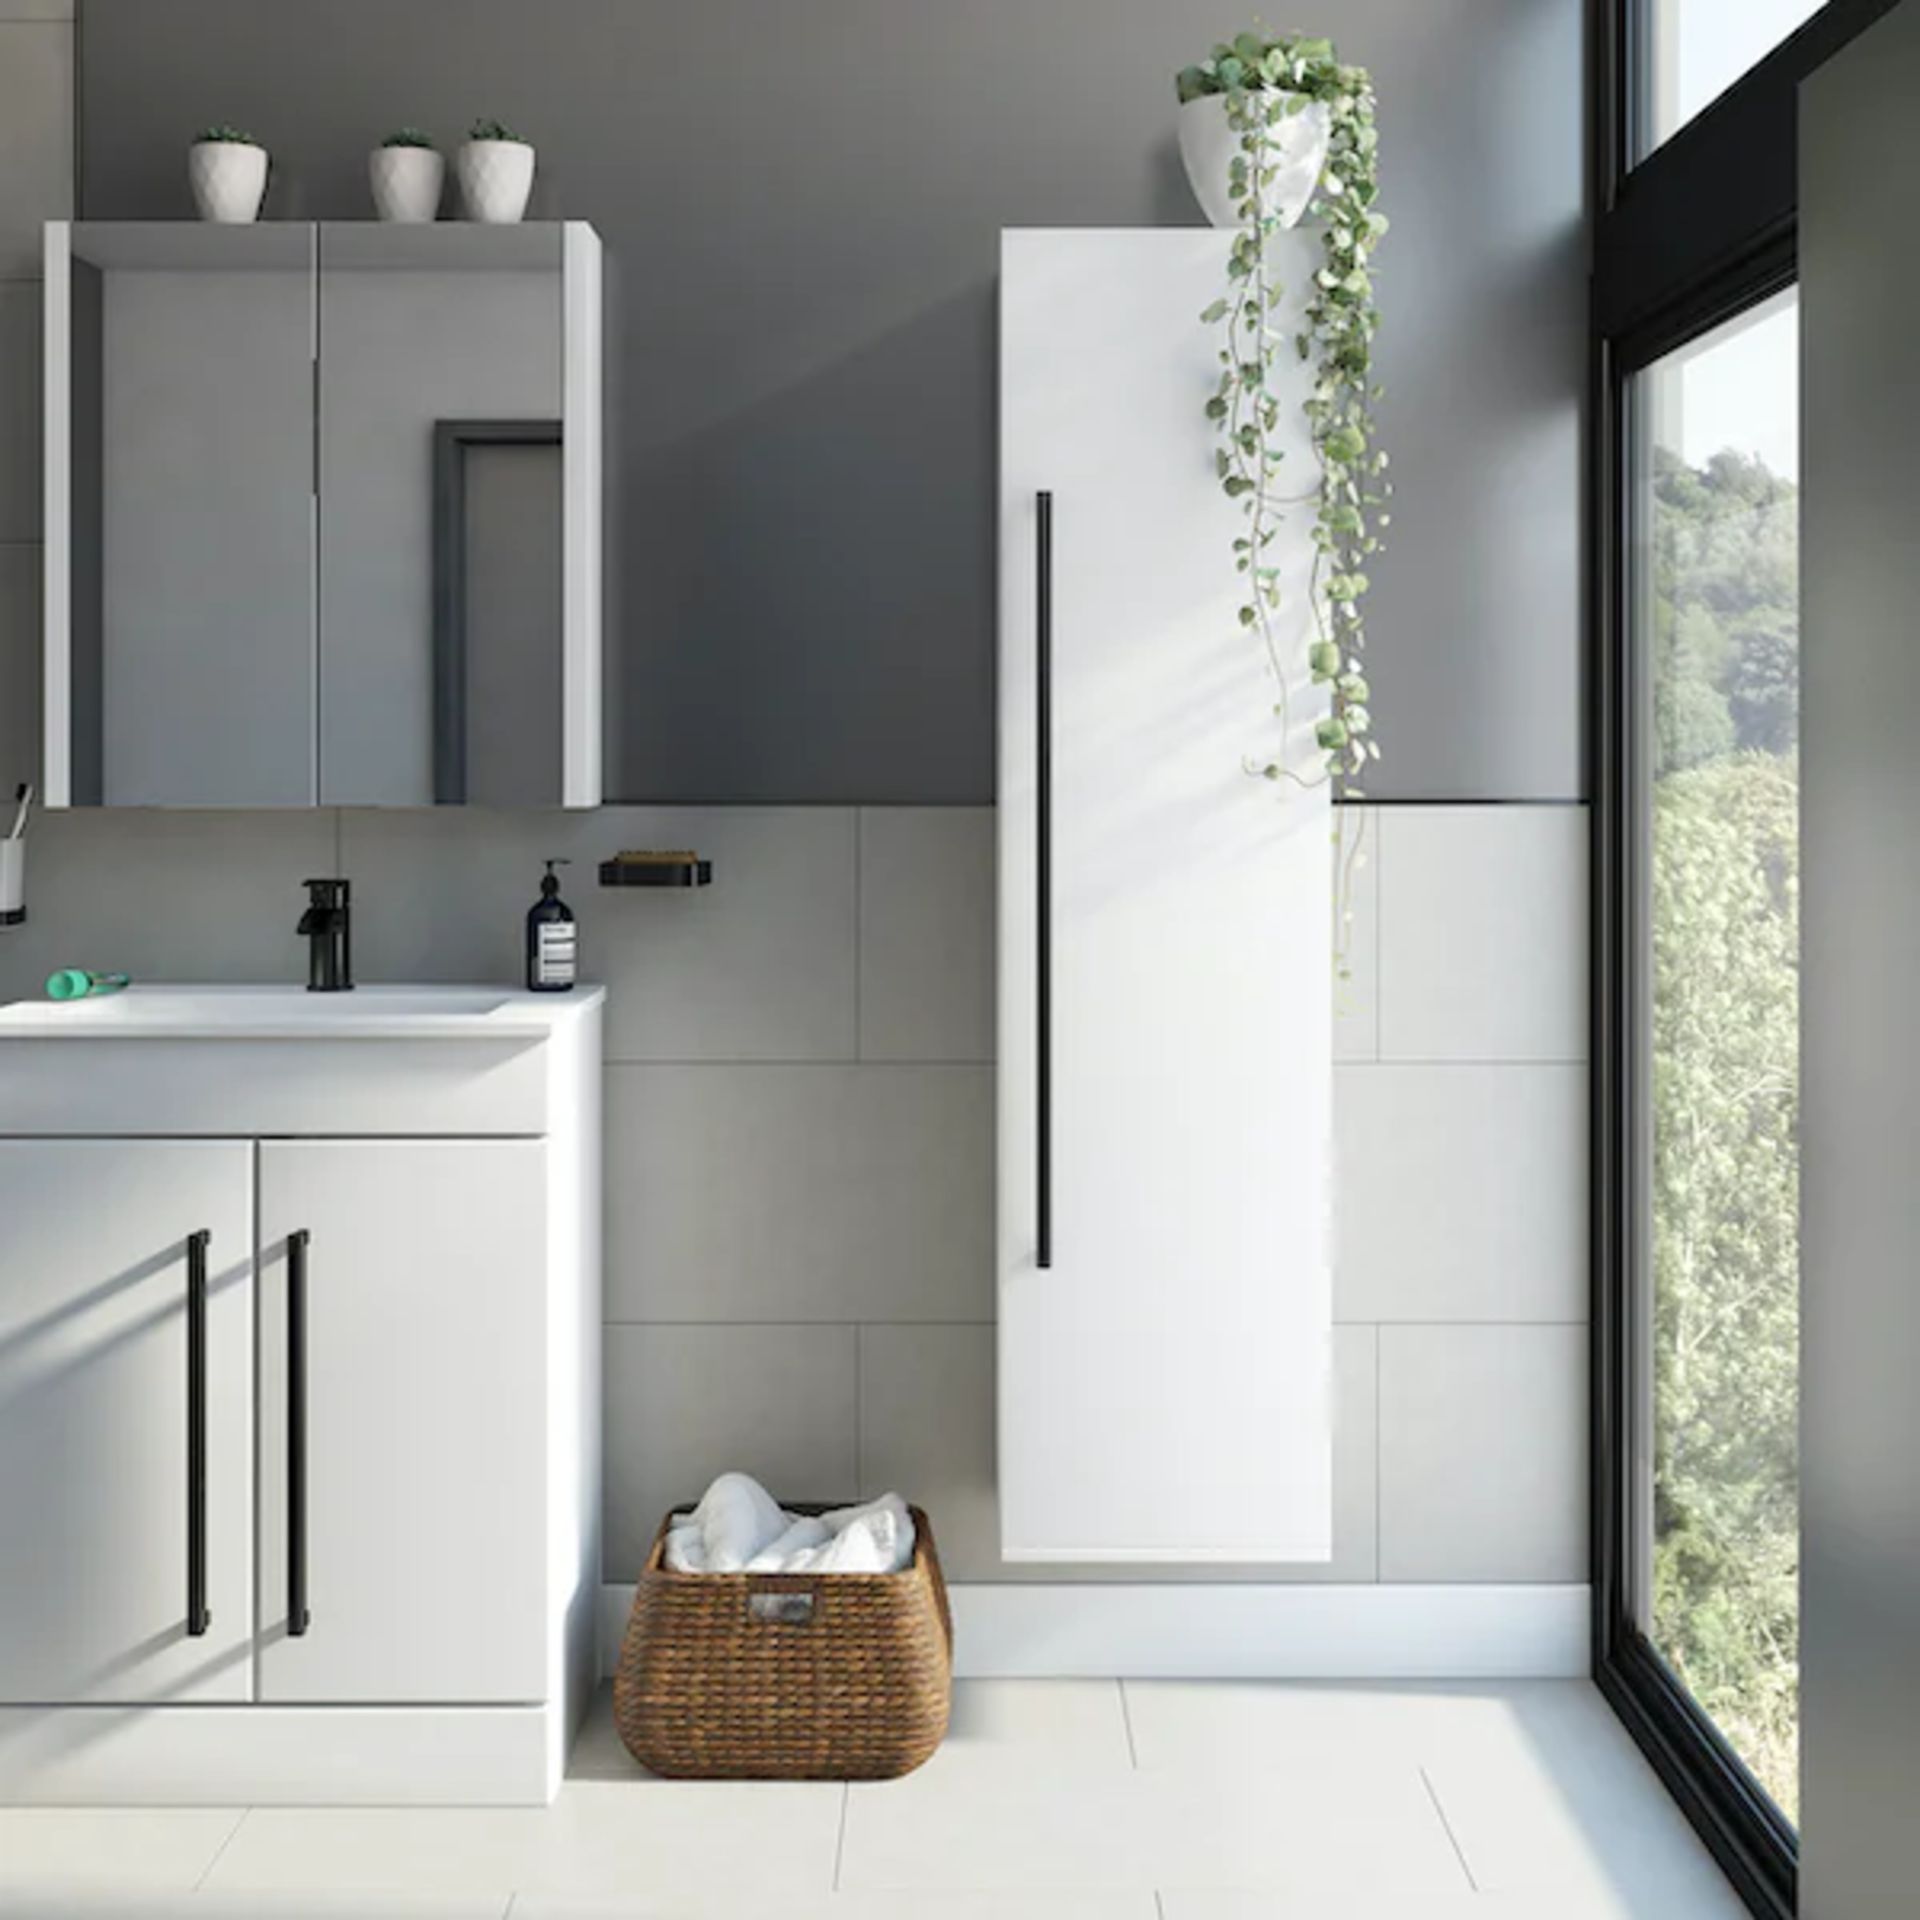 Derwent White Tall Wall Hung Cabinet Bathroom Cabinet - Image 5 of 6